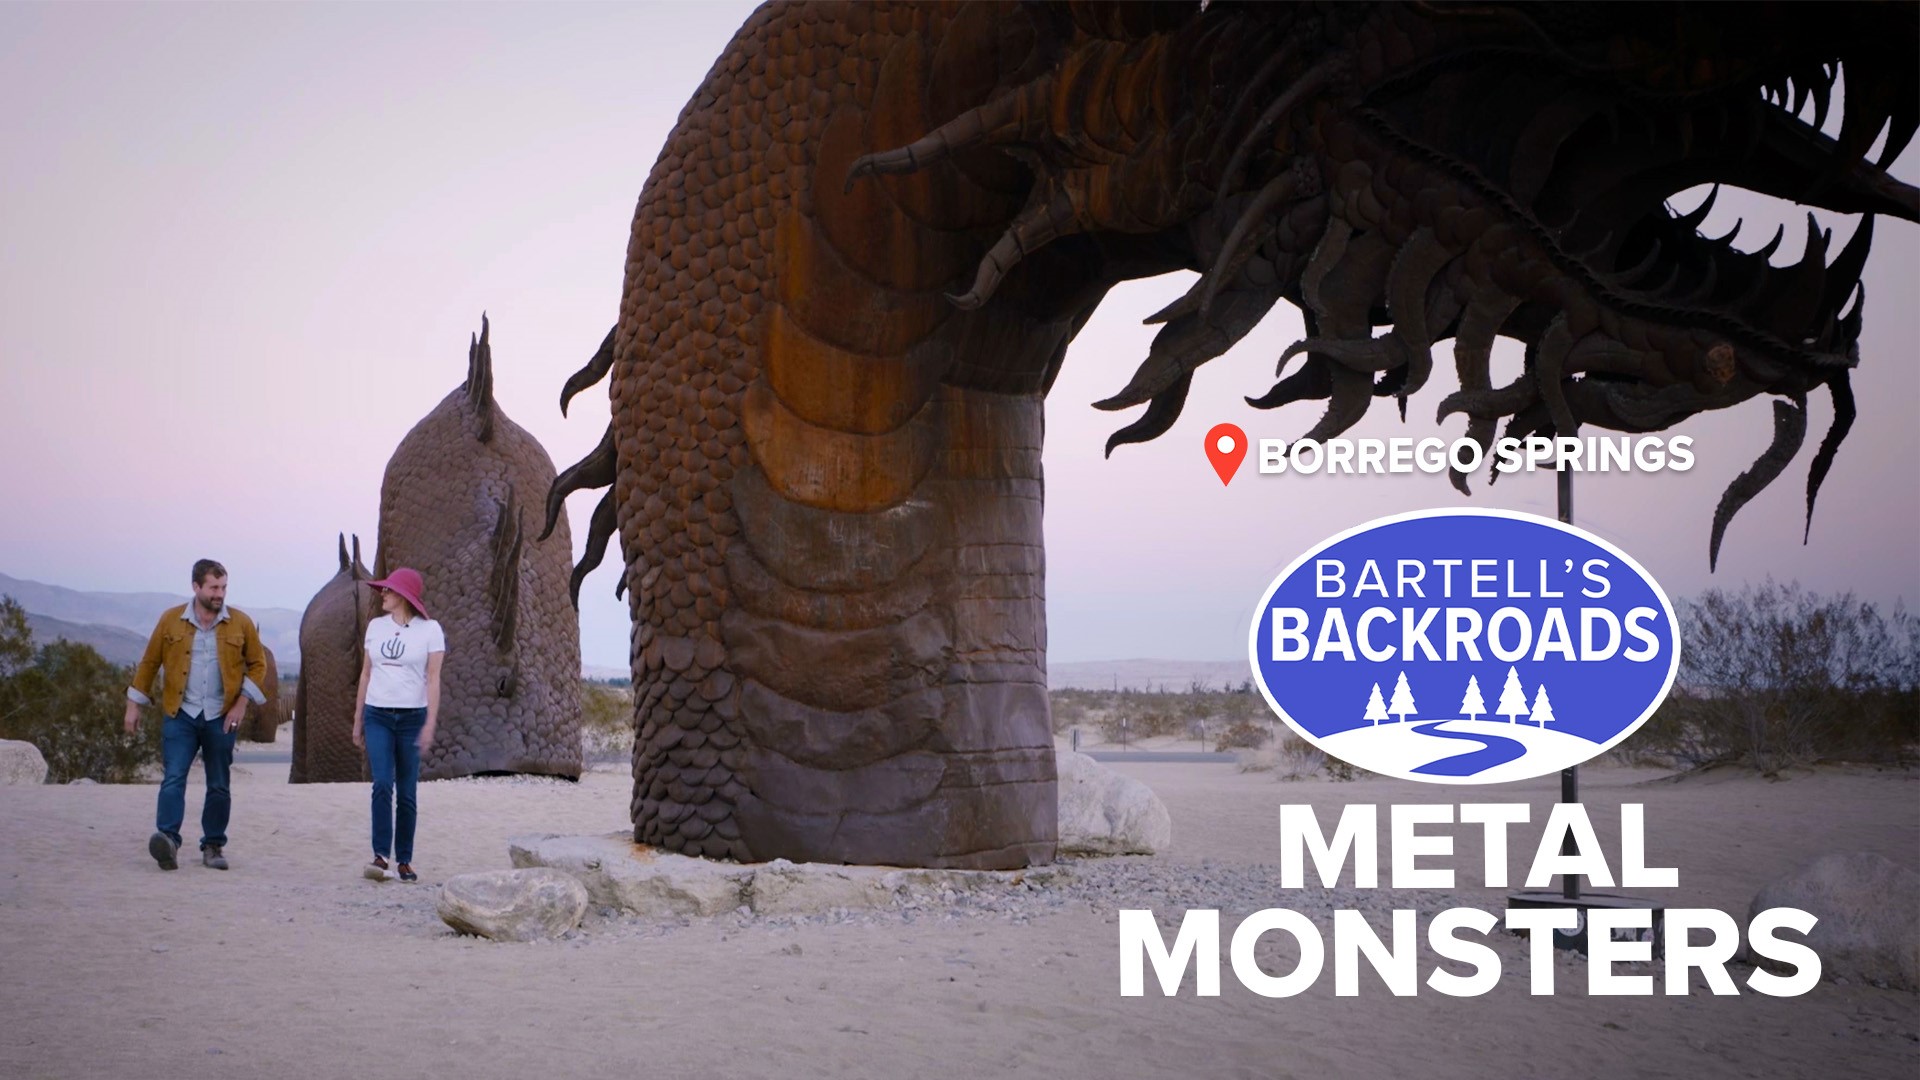 The story of why metal monsters roam the sands of one California desert. A Bartell's Backroads adventure.